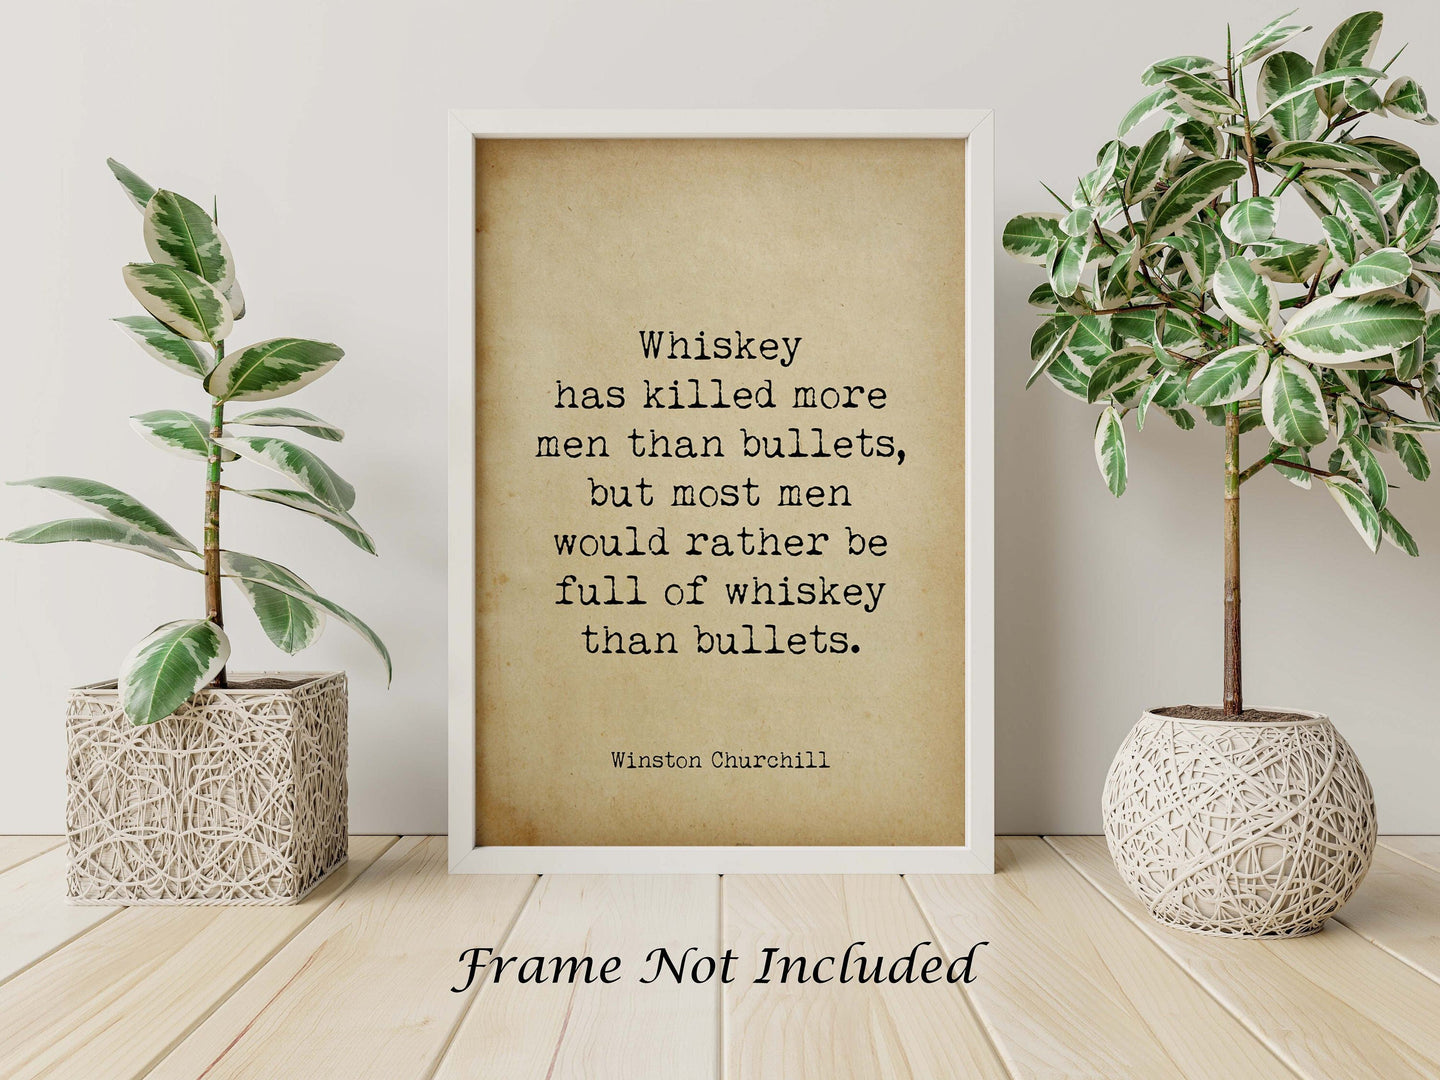 Winston Churchill Quote - Whiskey Has Killed More Men Than Bullets...Physical print without frame